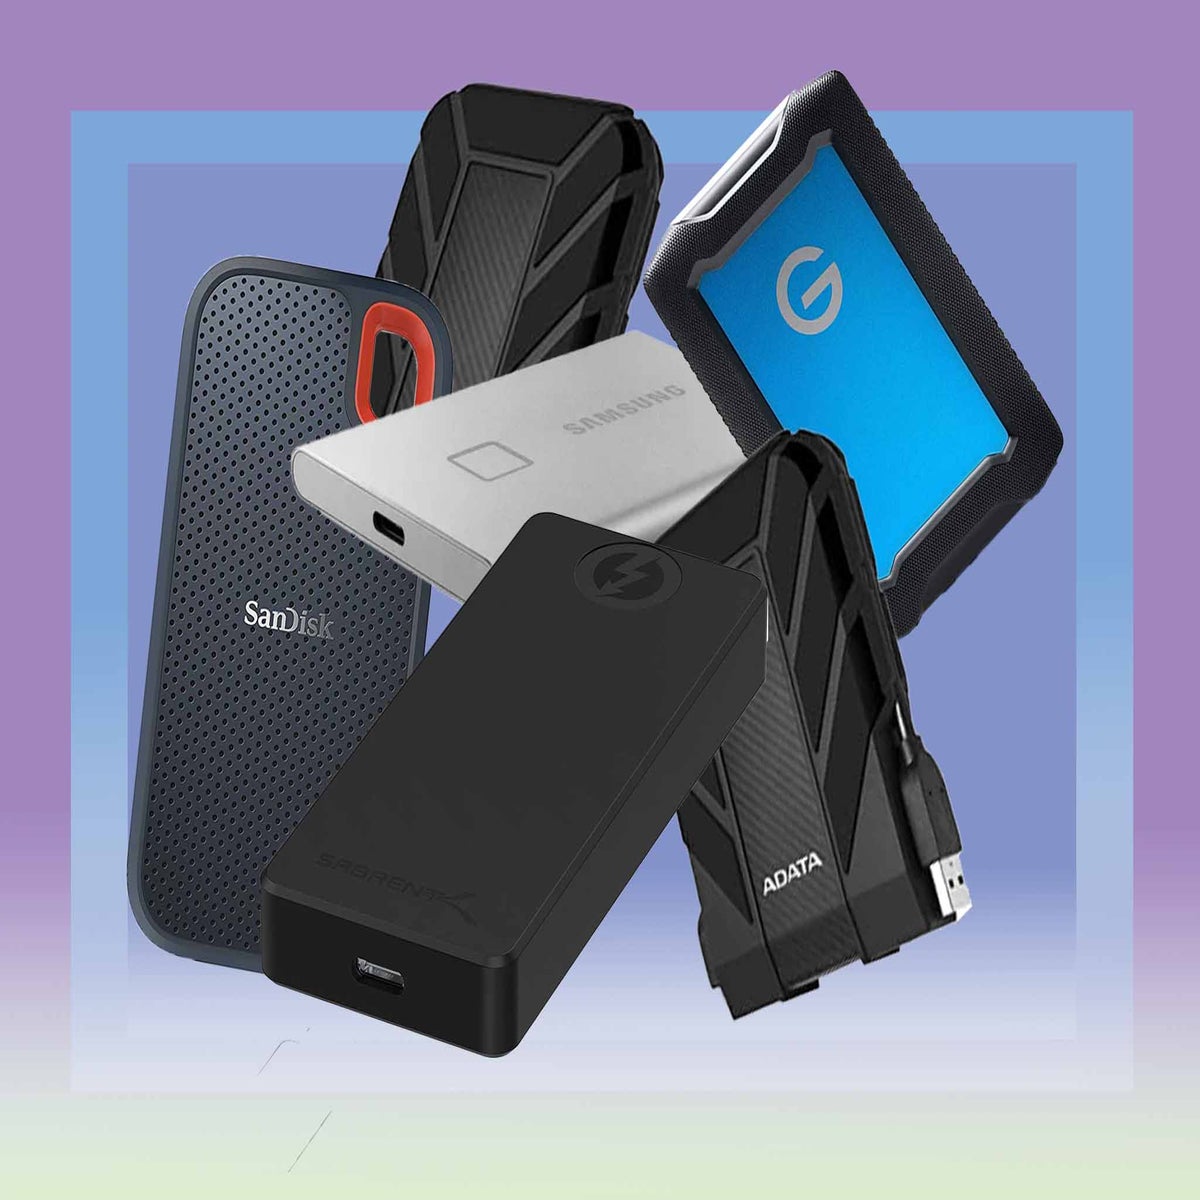 Buying Guide – External Hard Drives